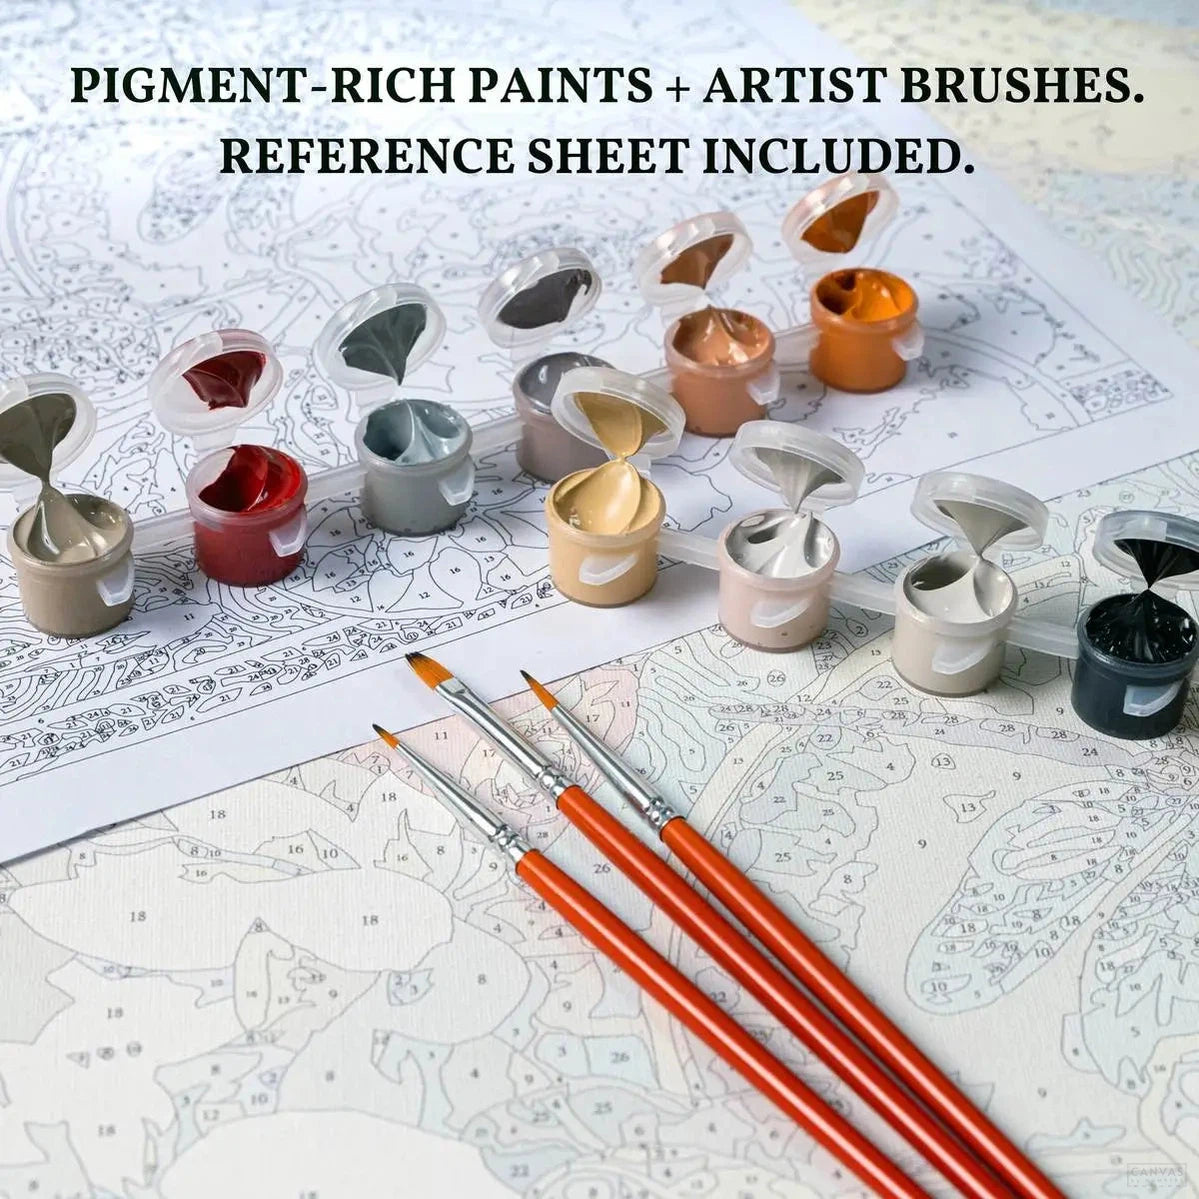 Custom Paint by Numbers Kit for Personalized Artwork